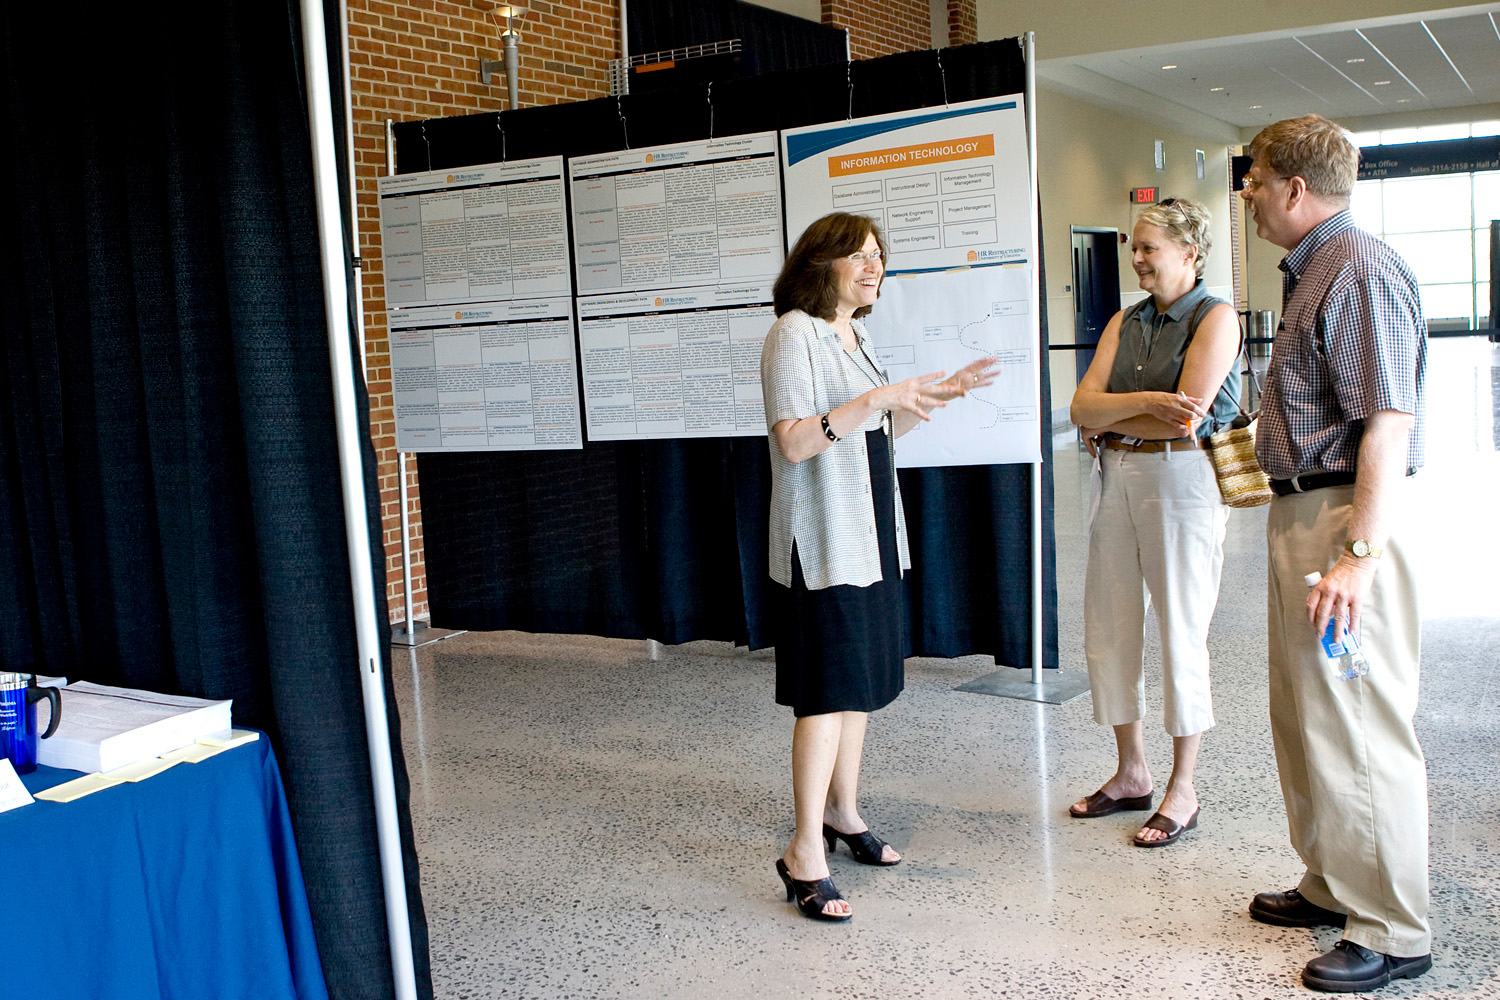 Susan Carkeek, left, talks to visitors during an expo